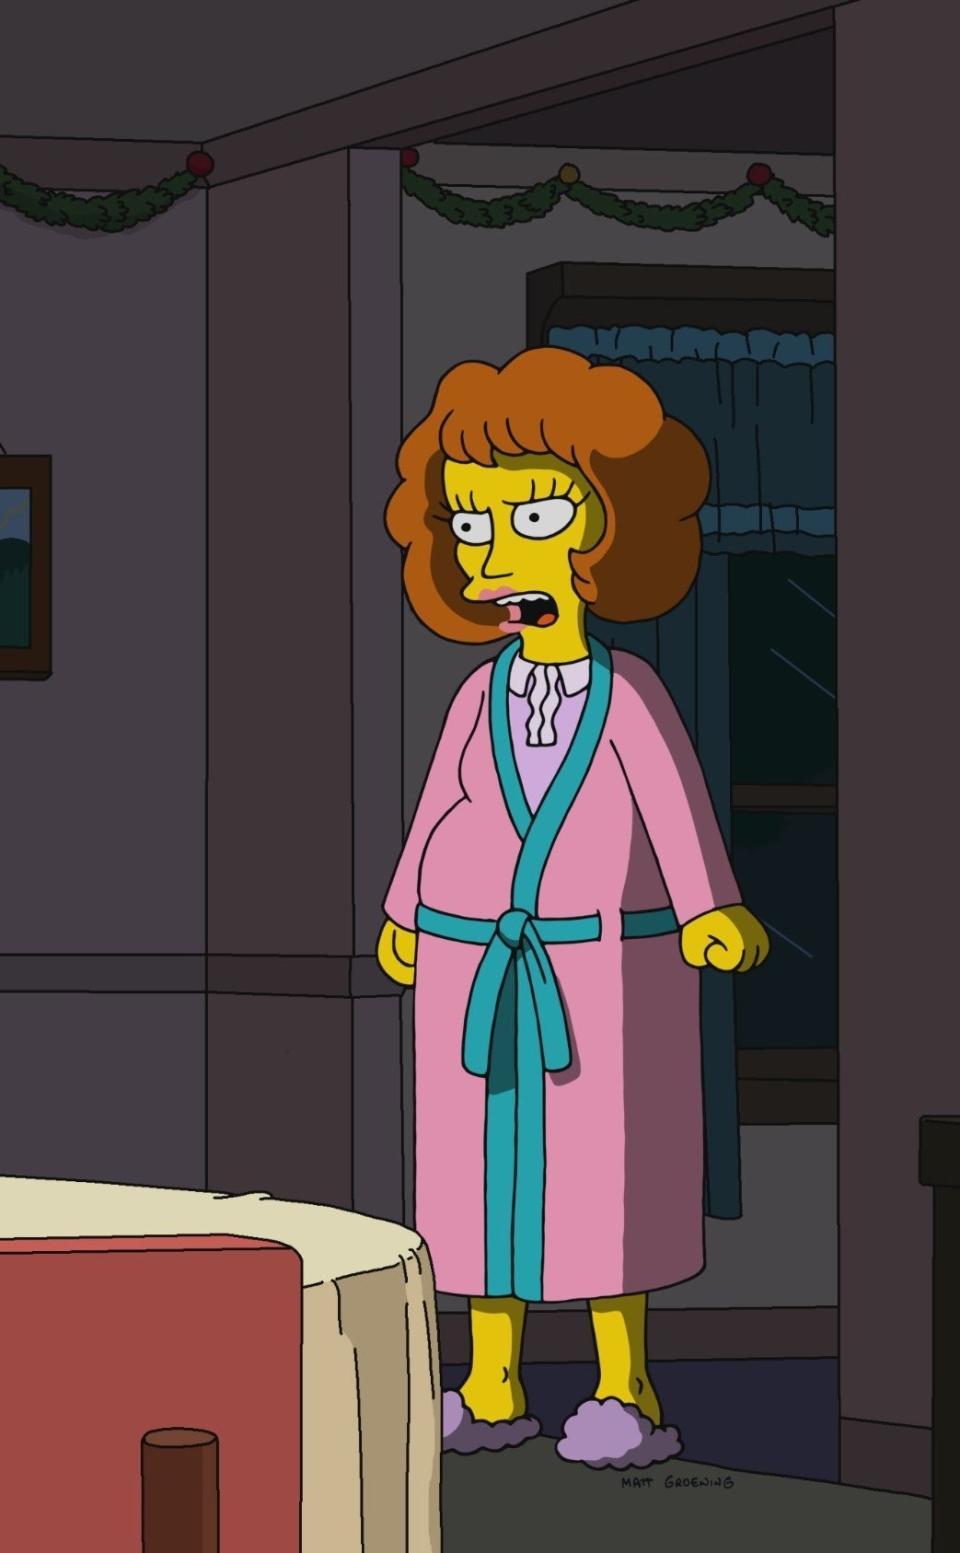 Maude Flanders in "The Simpsons."